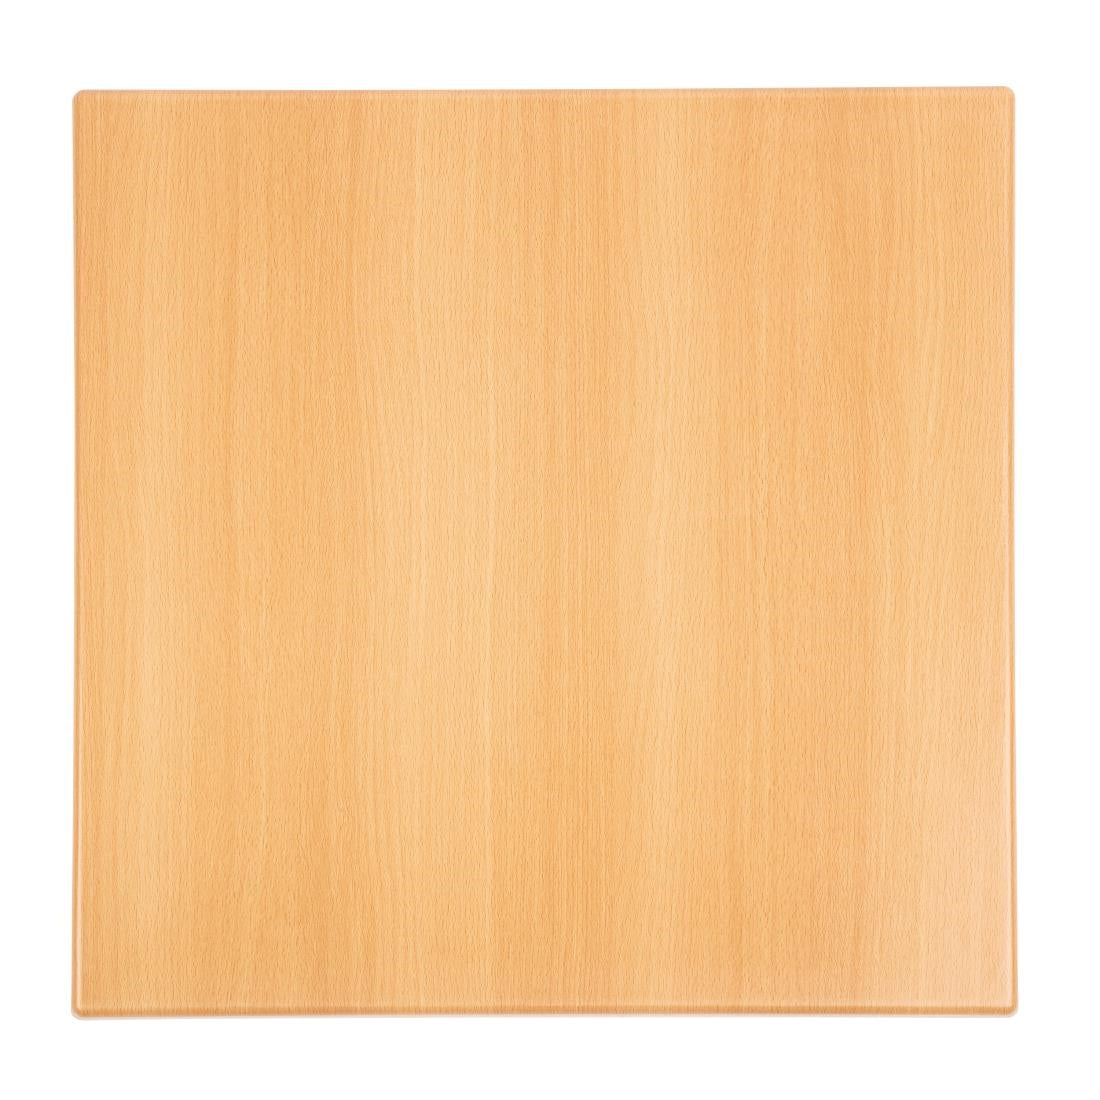 Special Offer Bolero Square Beech Table Top and Base Combo